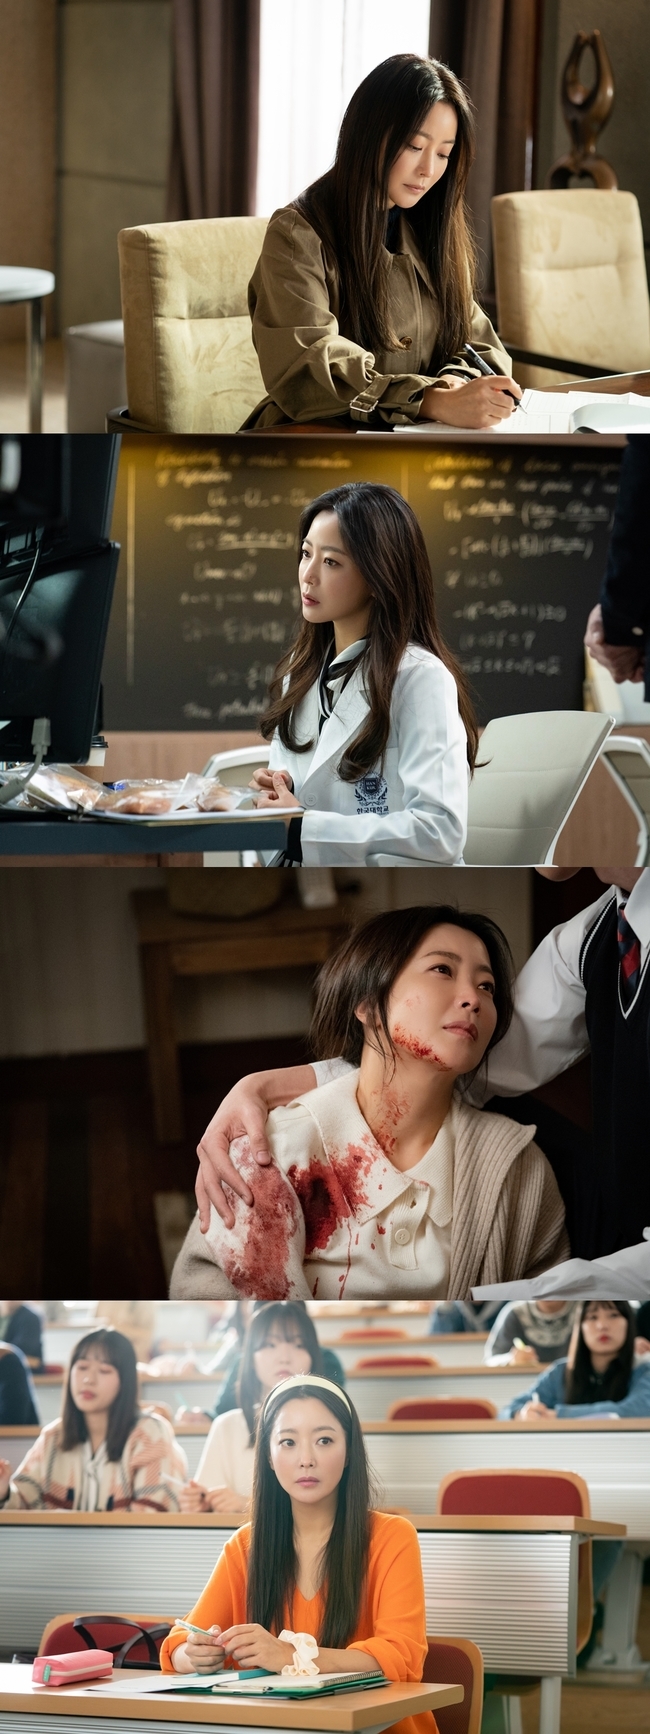 Alice Kim Hee-sun is playing two different characters.SBSs Drama Alice (playplayed by Kim Gyu-won, Kang Cheol-gyu, and Kim Ga-young/directed by Baek Soo-chan) is running toward the middle.While the veil of Journey to the Center of Time, which is the central material of the drama, is being stripped off one by one, the unpredictable development is increasing the immersion.Among them, the curiosity of viewers about two characters, Yoon Tae-yi and Park Sun-young, played by Kim Hee-sun, is amplifying.In 2050, when Journey to the Center of Time became possible, Alices Yoon Tae-yi came to 1992 with her lover Yoo Min-hyuk (Mr. Kwak Si-yang) to find a prophecy related to Journey to the Center of Time.She found out late that her stomach was growing new life, and she could not pass through the radiation wormhole again while pregnant.And she changed her name to Park Sun-young and gave birth to a child alone.Park Sun-youngs life that began like that. Park Jin-gyeom (played by Joo Won) was born with innate non-feeling.Then, on the night of the red moon in 2010, Park Sun-young was murdered in question. And ten years later. 2020 yearPark Jin-gum, who became a police officer, found a woman who looked the same as her dead mother while she was chasing after discovering the same unidentified drone she had seen the day her mother died.She is named Yoon Tae 2020 yearPark Sun-young and 2020 year enough to tear down as soon as his son Park Jin-kyum sees himYoon Tae-yi looks the same. Park Sun-youngs ex-lover Yoo Min-hyuk also has 2020 yearI lost my word when I saw Yoon Tae-yi. So, 2020 year among Alice enthusiastic viewersThere is a disagreement whether Yoon Tae-yi and Park Sun-young are the same person or not.According to the production team of Alice, Yoon Tae-yi and Park Sun-young are not the same person.Earlier in 2010, when Park Jin-gyeom played Journey to the Center of Time, he faced 22-year-old Yoon Tae-yi.And then I called my mom, Park Sun-young, who had both Yoon Tae-yi and Park Sun-young in the same time of 2010.In other words, the two can not be the same person.There is also evidence that Yoon Tae-i and Park Sun-young are not the same person.Park Sun-young is originally a Journey to the Center of Time from 2050.Judging by the age of Park Sun-young in 2050, if she was the same person, she should not have been born in 2010; however, Yoon Tae-i was already 22 years old in 2010.This shows that Yoon Tae-yi and Park Sun-young are not the same person.In addition, through the dialogue of the characters in the drama, it can be guessed that Yoon Tae-yi and Park Sun-young resemble faces but are different characters in different times and different dimensions.emigration site